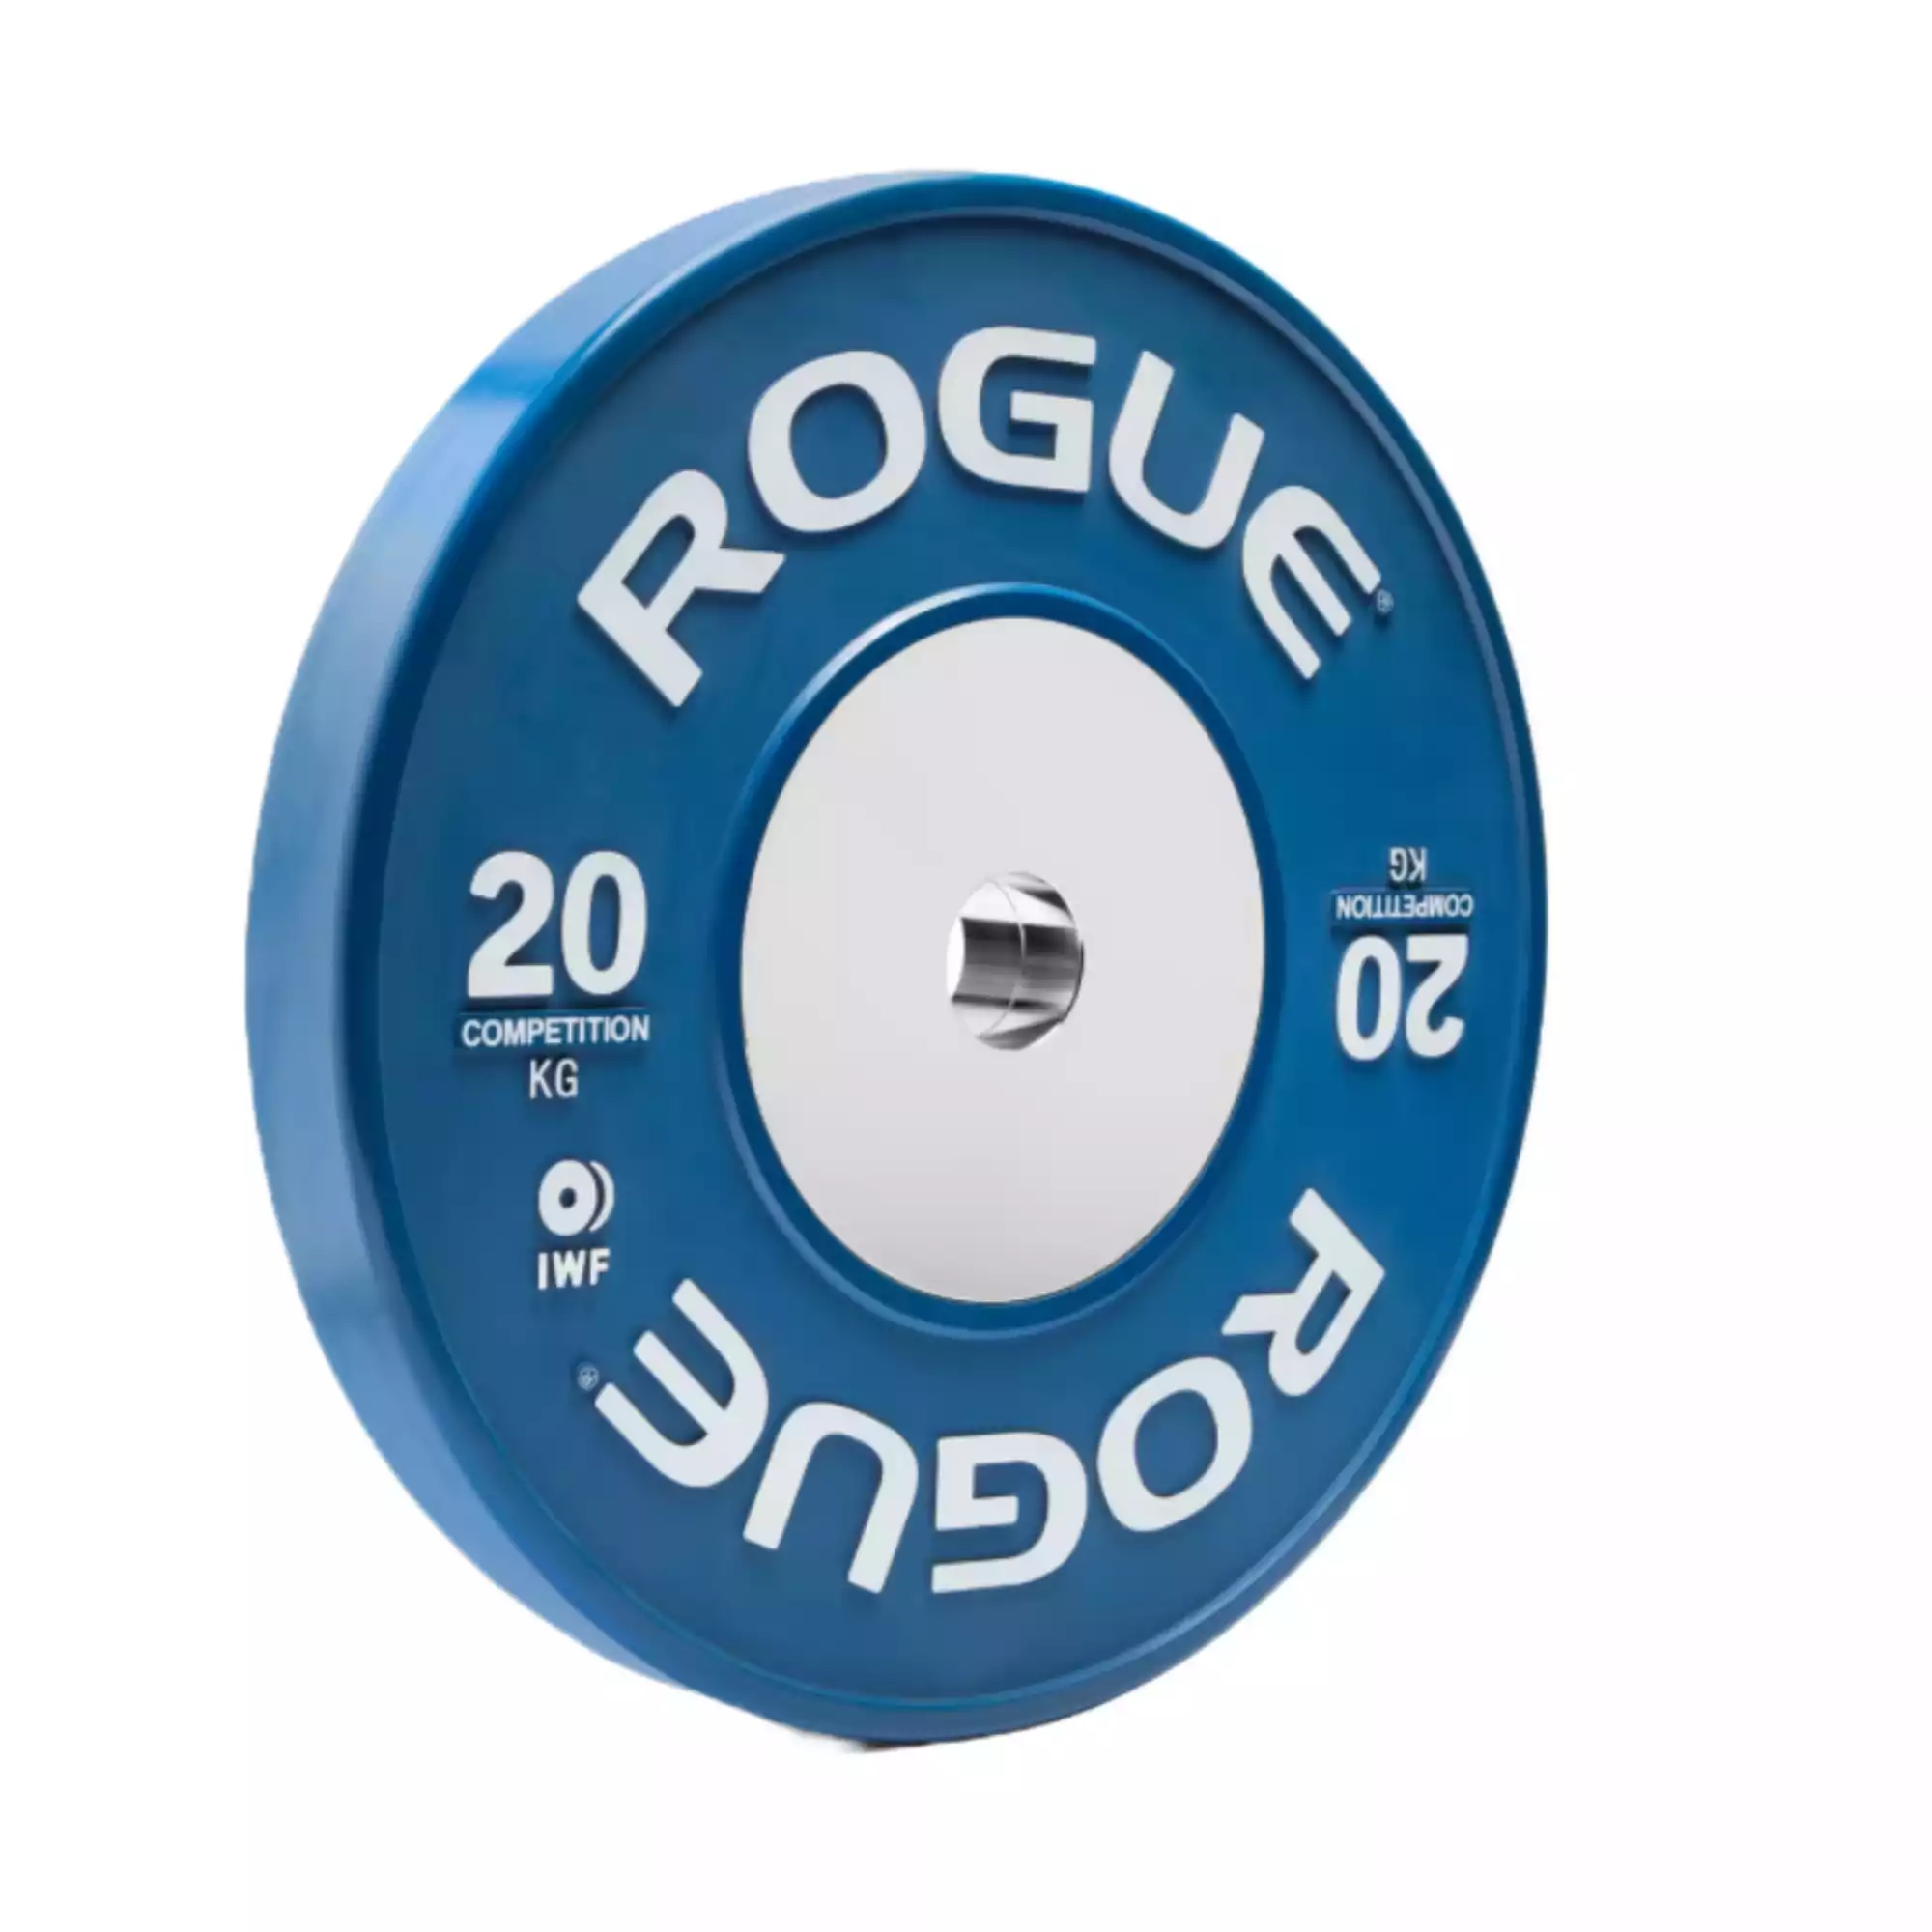 Rogue Fitness KG Competition Plates (IWF)